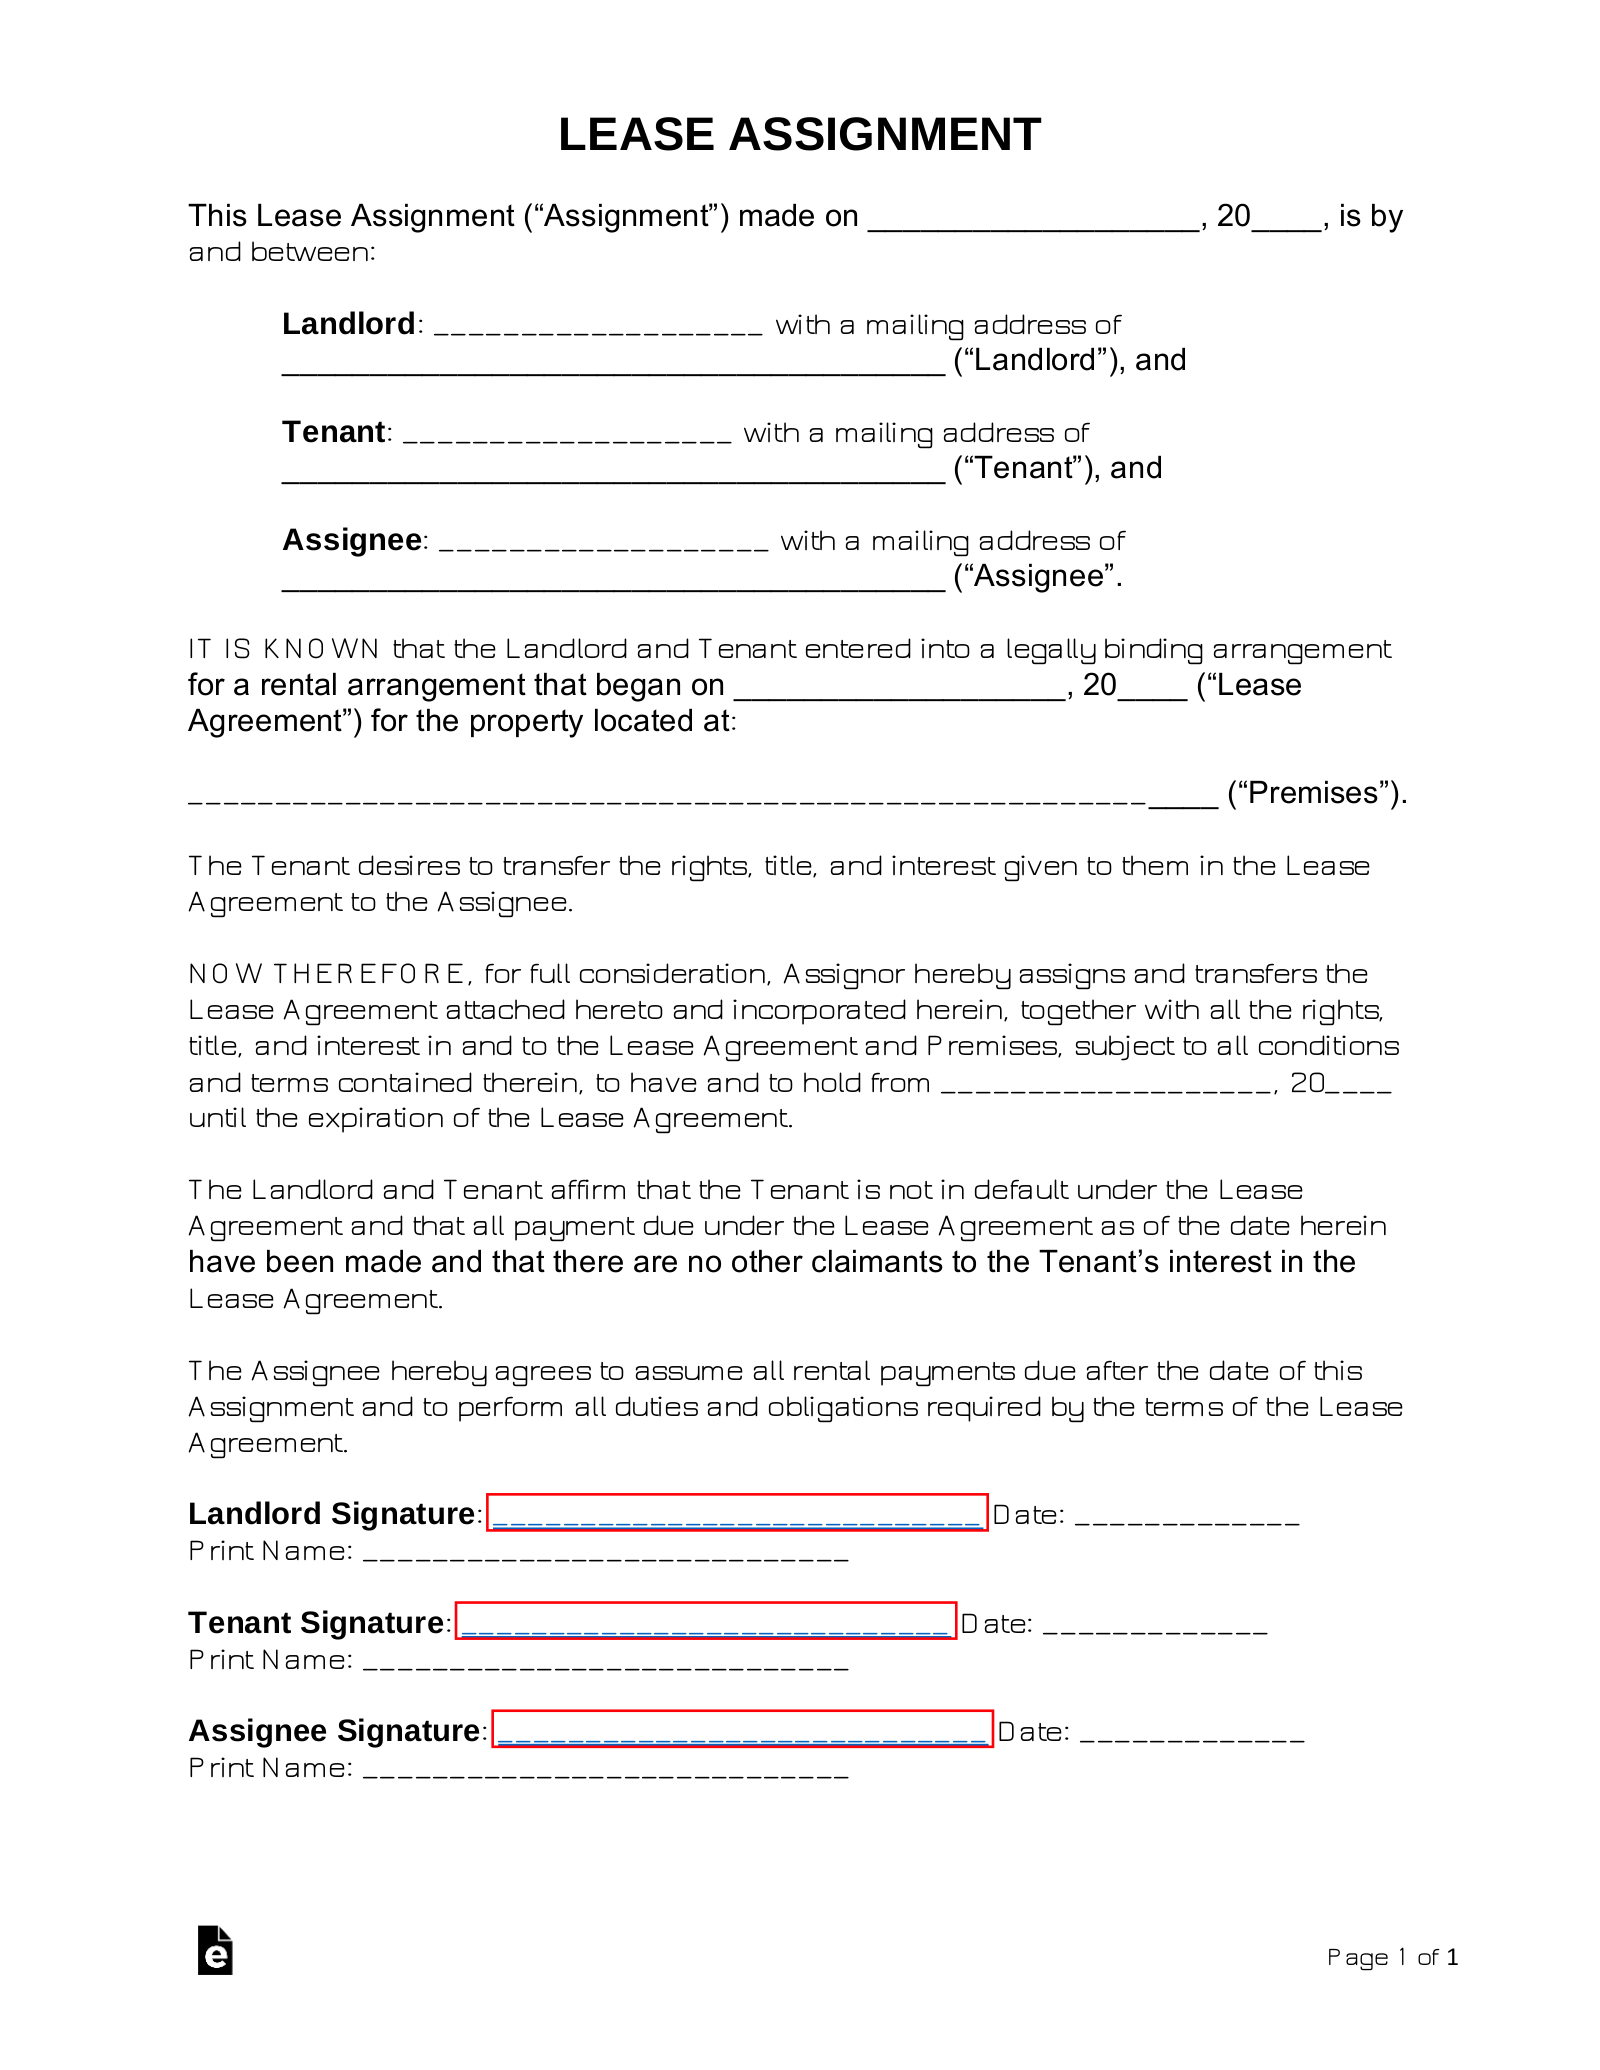 Lease Agreement Letter Sample from eforms.com